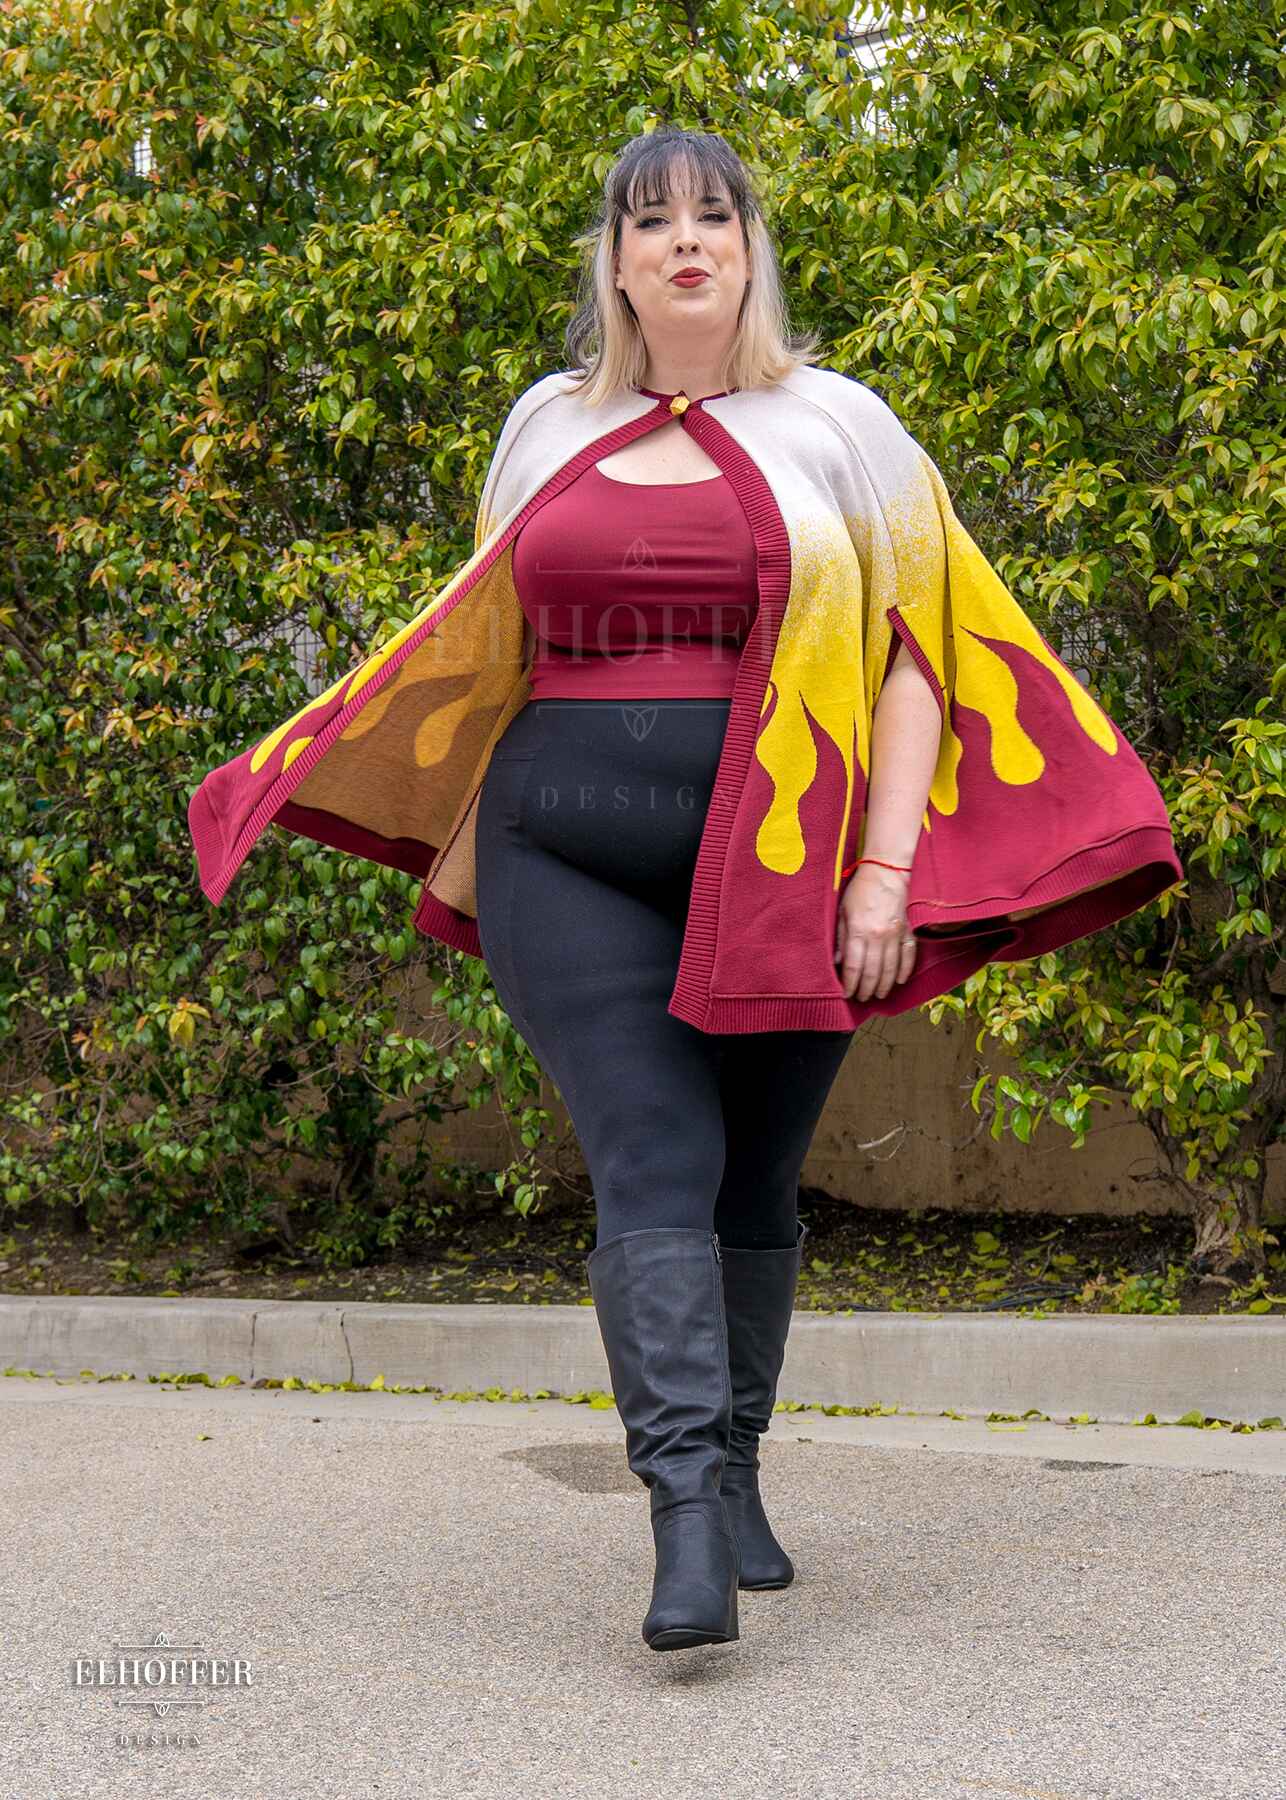 Katie Lynn, a fair skinned 2xl model with short black and blonde hair with bangs, is wearing a below hip length knit cape.  The cape is a gradient of color from white at the shoulders, to yellow, to a red fire design at the bottom, it also has a button closer at the neck, and armholes in the side seam. She paired the cape with a burgundy red scoop neck crop top and black leggings.